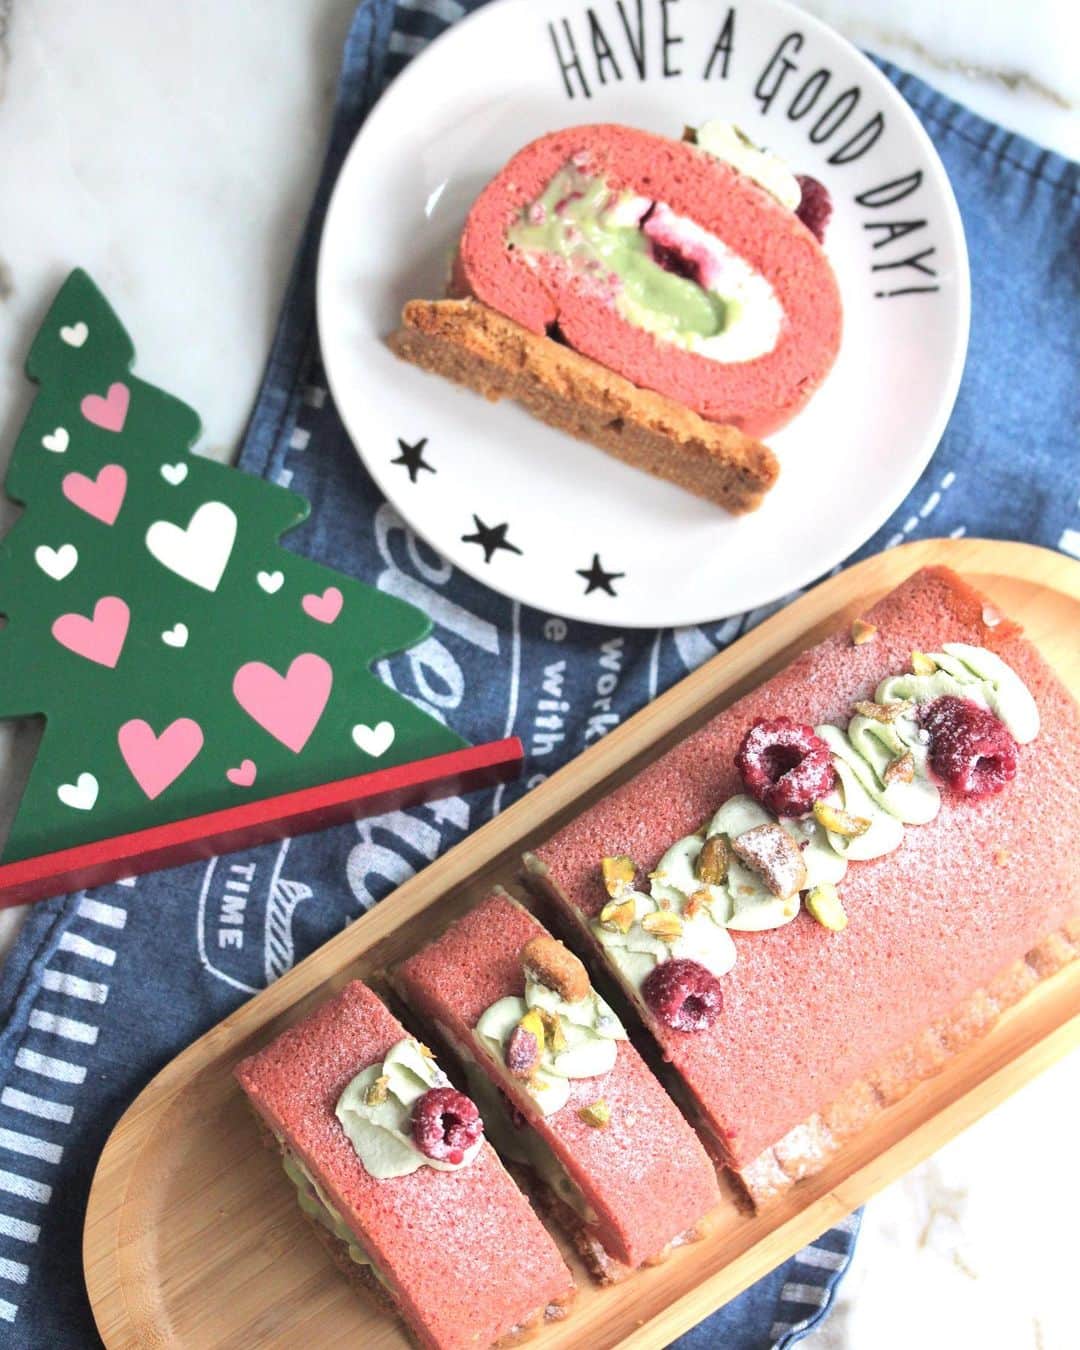 Li Tian の雑貨屋さんのインスタグラム写真 - (Li Tian の雑貨屋Instagram)「{Orders Open 🎉🎄}  This Christmas, I’ll be doing this Pistachio Strawberry Roll - fluffy strawberry sponge filled with pistachio custard, raspberry compote and fresh cream on a crunchy streusel base. Topped with pistachio chantily, fresh raspberry and roasted pistachio. 🎄 🍓 *contains no alcohol*   Shell life: 3 days in fridge  Servings: Good for 8 pax   Collection Dates:  Dec 12 (Sat) - filling fast  Dec 18 (Fri)- filling fast  Dec 19 (Sat)-fully booked  Dec 23 (Wed) - fully booked  Dec 24 (Thurs)- fully booked   Pick up location: AMK (Self-collection / u may wish to arrange own delivery)   Kindly note that full payment is required to confirm the orders.   DM for enquiries/orders.Thank you 😊  • • • #dairycreamkitchen #singapore #desserts #igersjp #yummy #love #sgfood #foodporn #igsg #ケーキ  #instafood #beautifulcuisines #sgbakes #bonappetit #cafe #cakes #bake #sgcakes #スイーツ #feedfeed #pastry #sgcafe #cake #homebaker #stayhomesg #homebake #christmas #pistachio #strawberry #sgchristmas」12月4日 12時15分 - dairyandcream